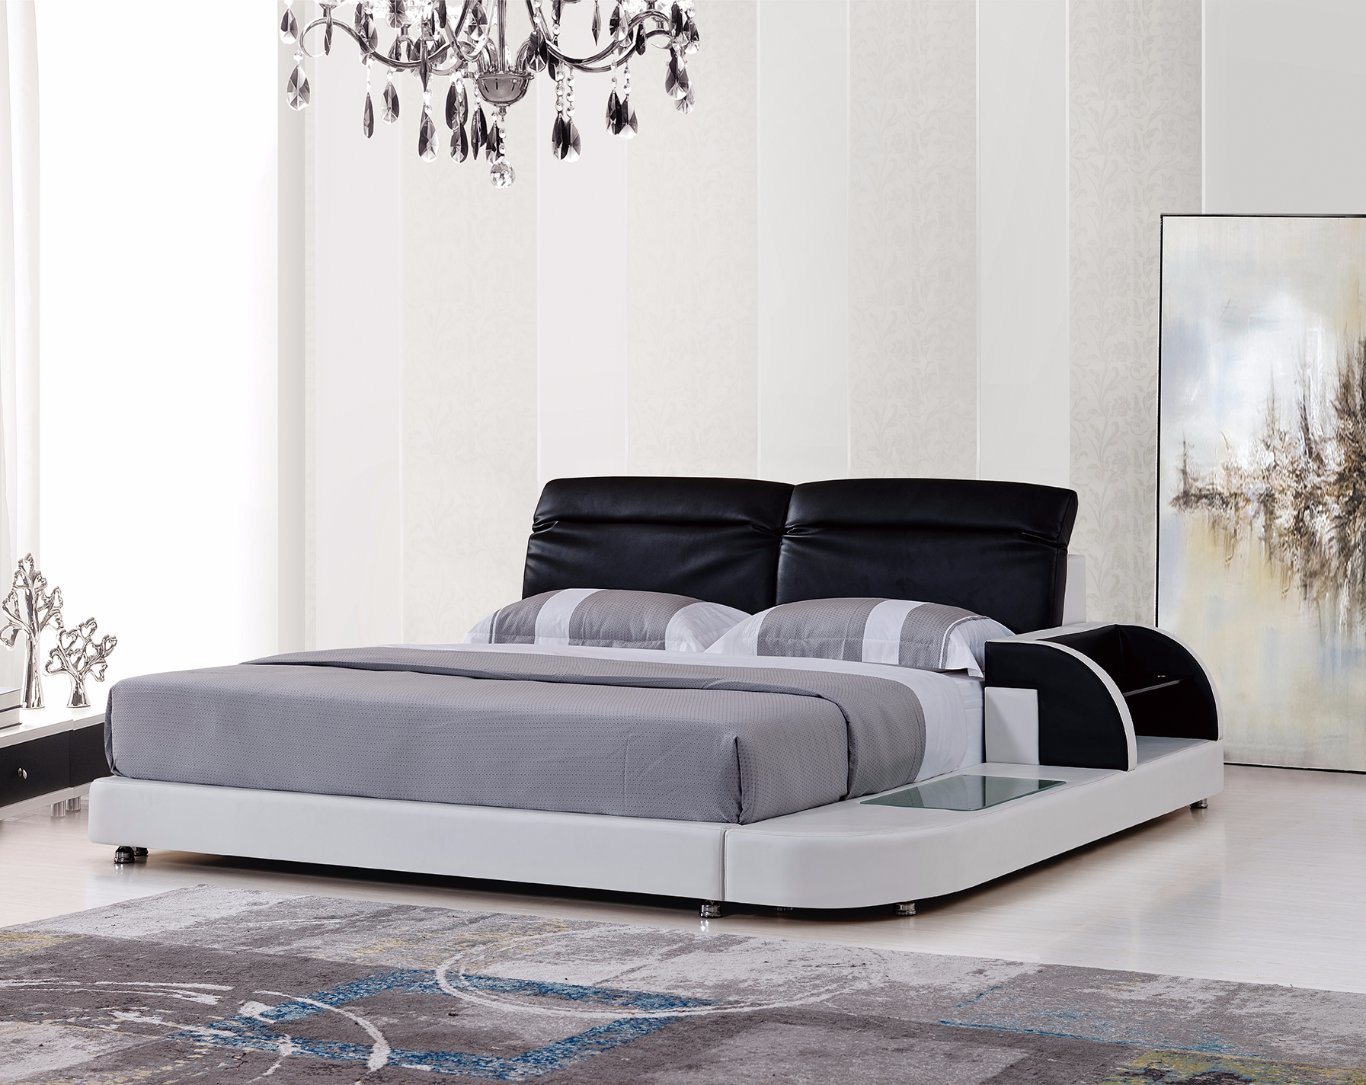 Queen Size Bedding Modern Leather Bed with LED Light